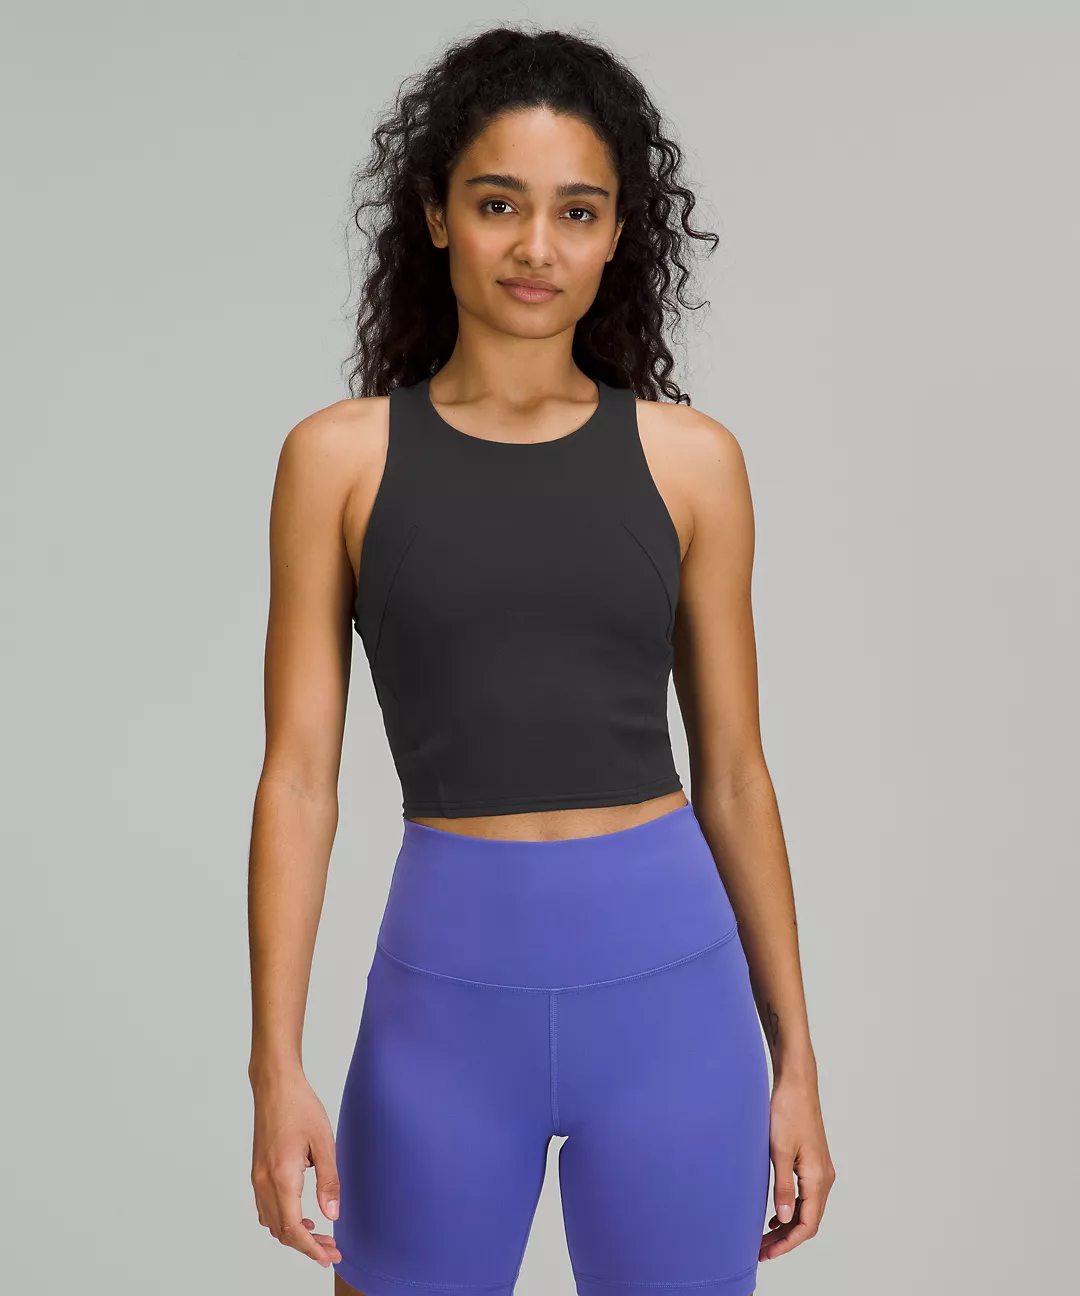 Lululemon: Tough to Match Quality of Athleisure Pioneer 